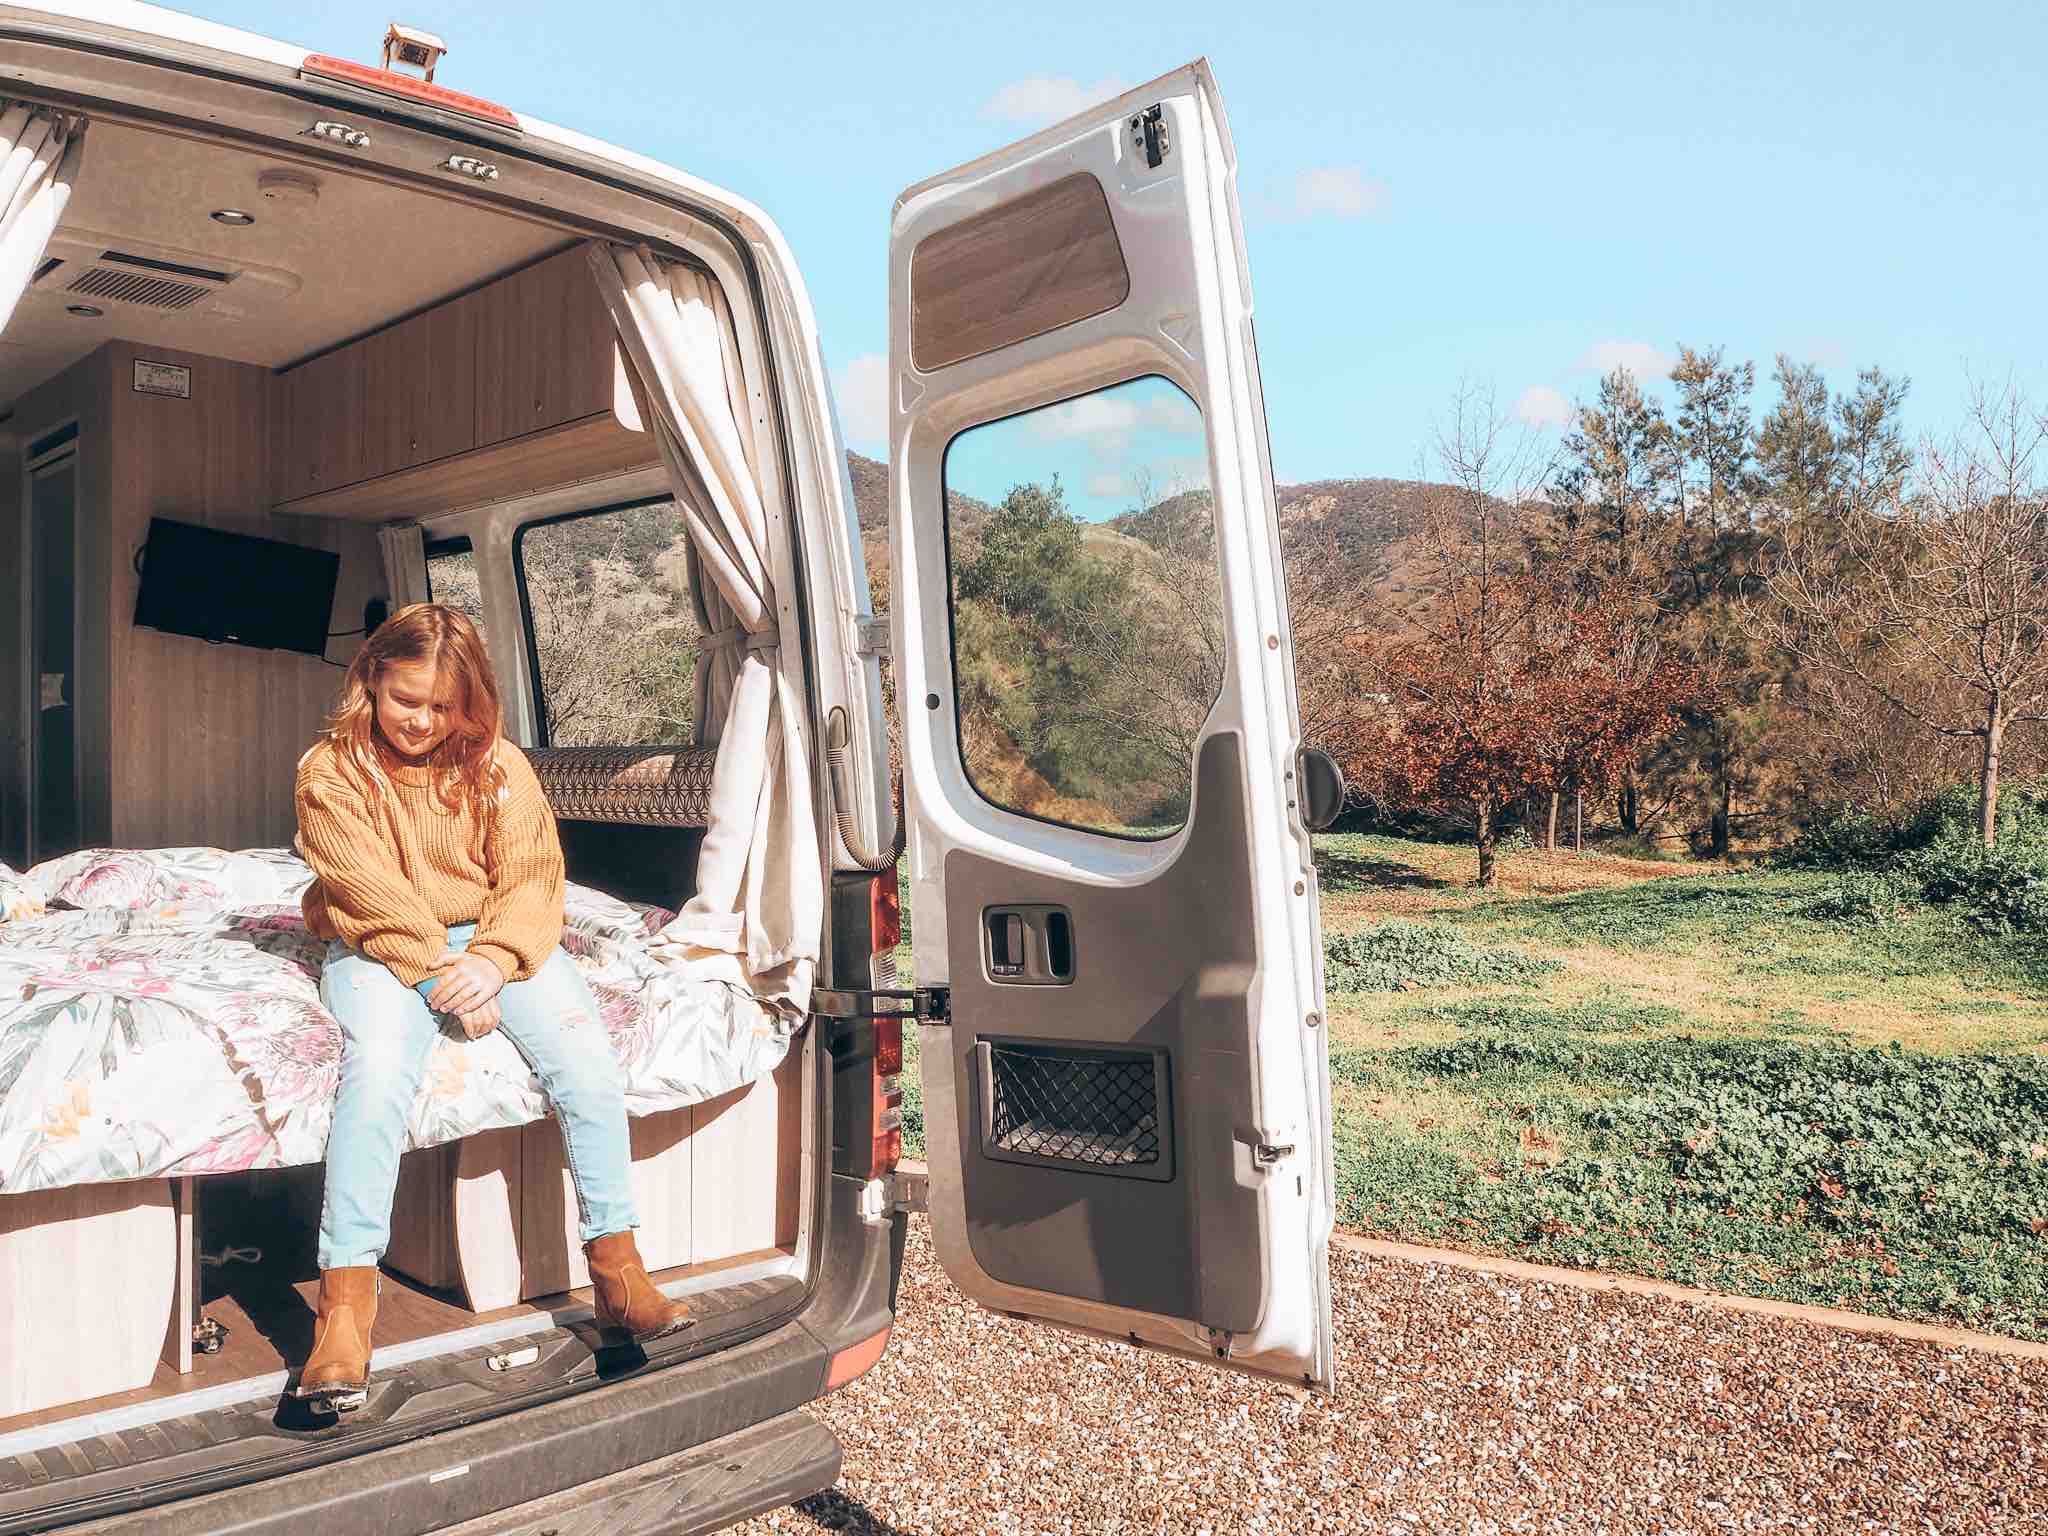 Emmie’s top tips for traveling in a Campervan with your parents